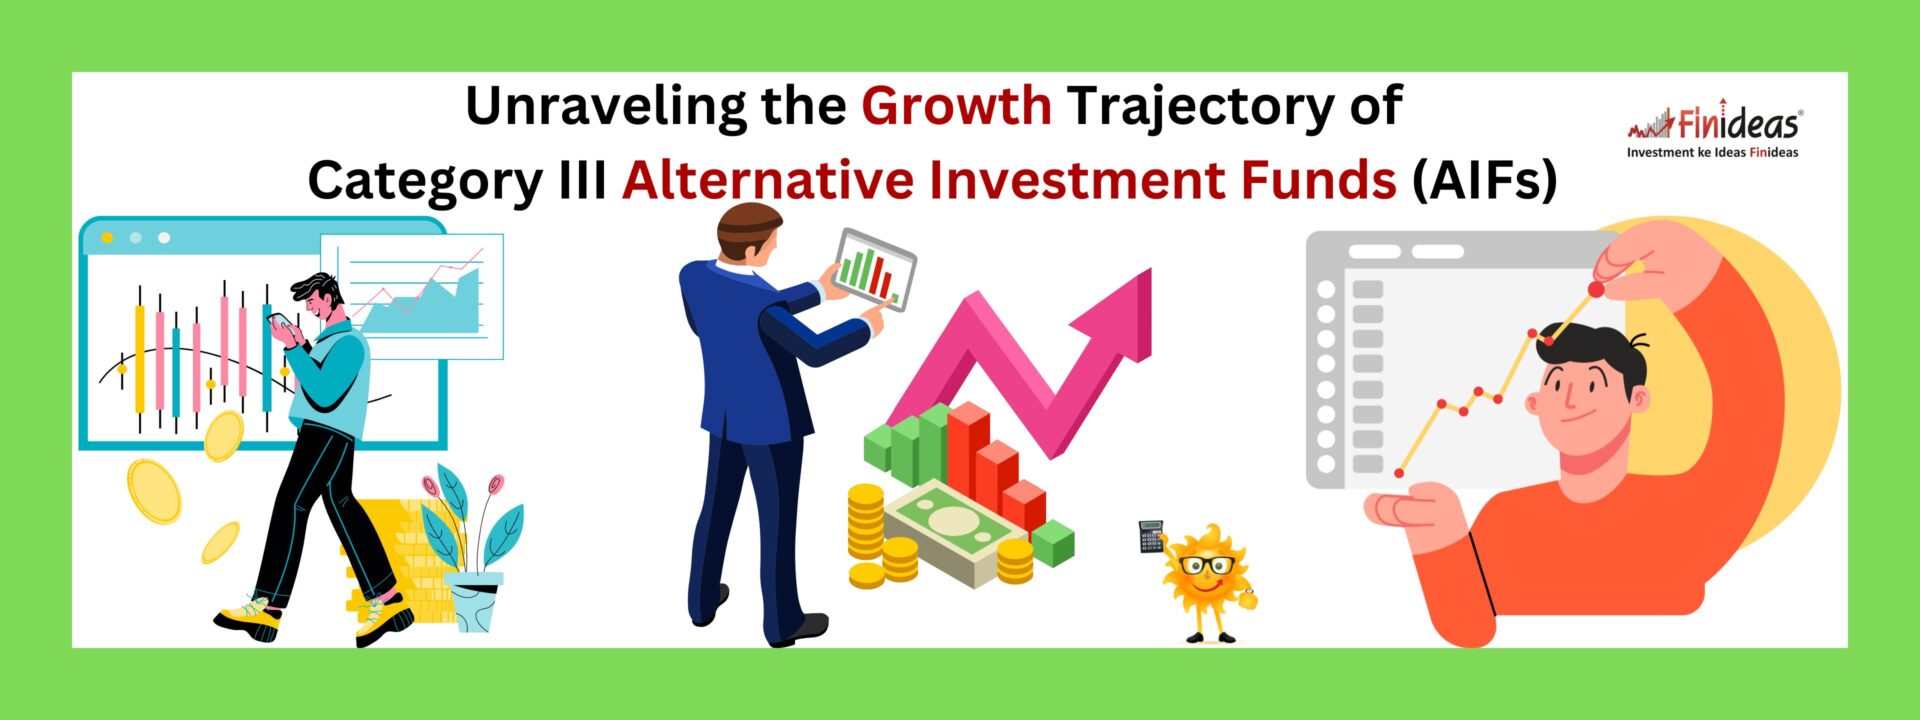 Category III Alternative Investment Funds (AIFs)